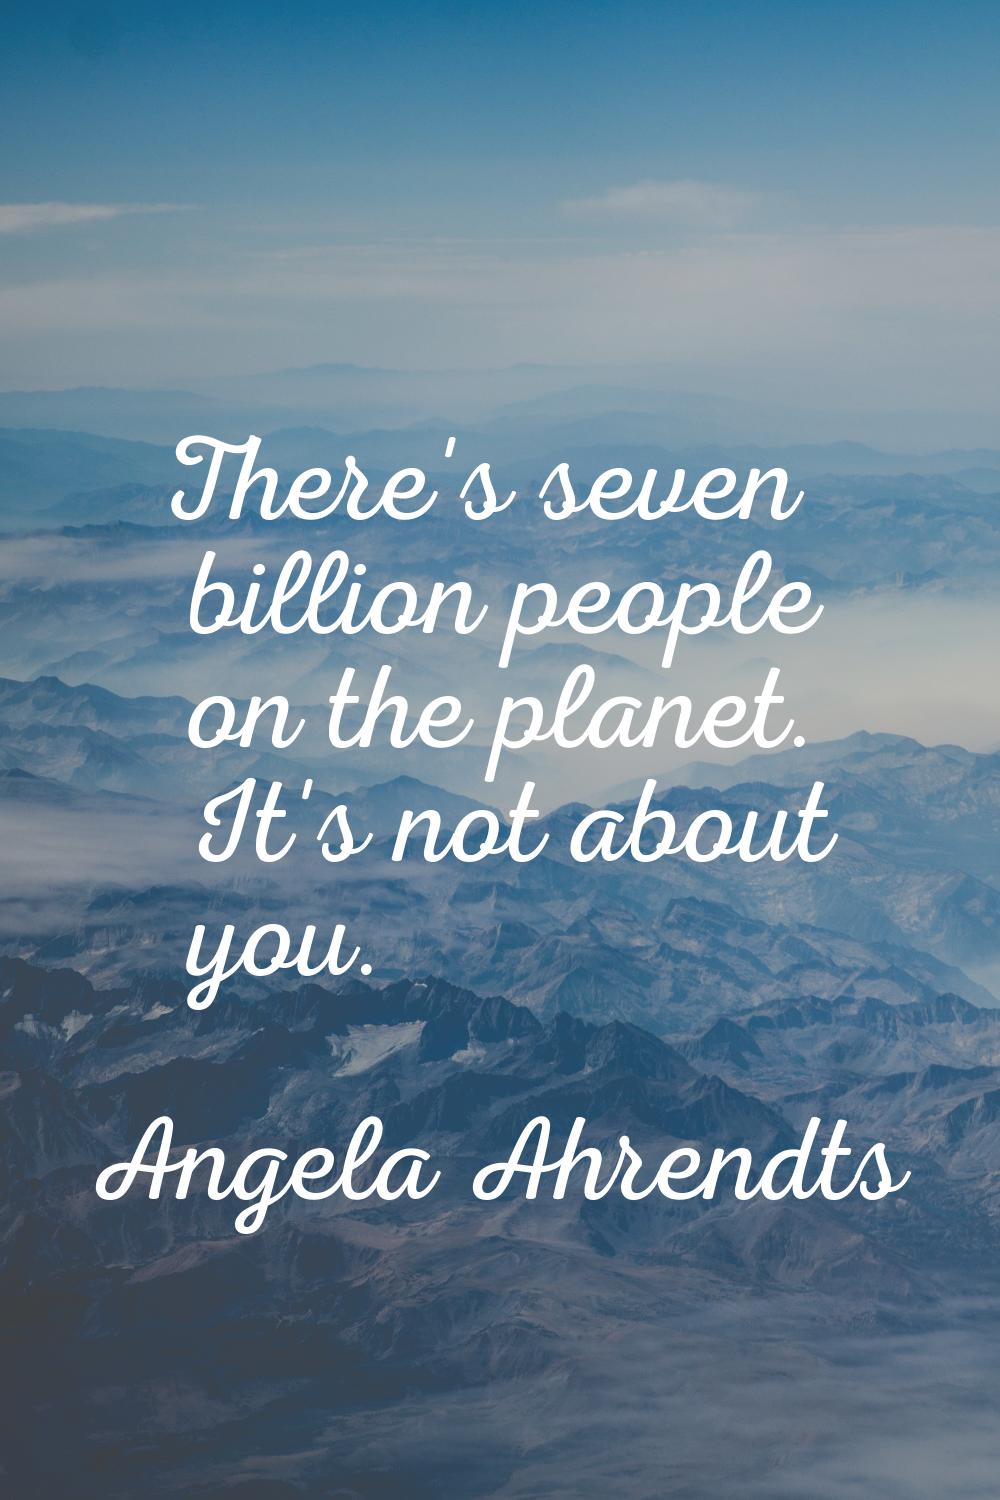 There's seven billion people on the planet. It's not about you.